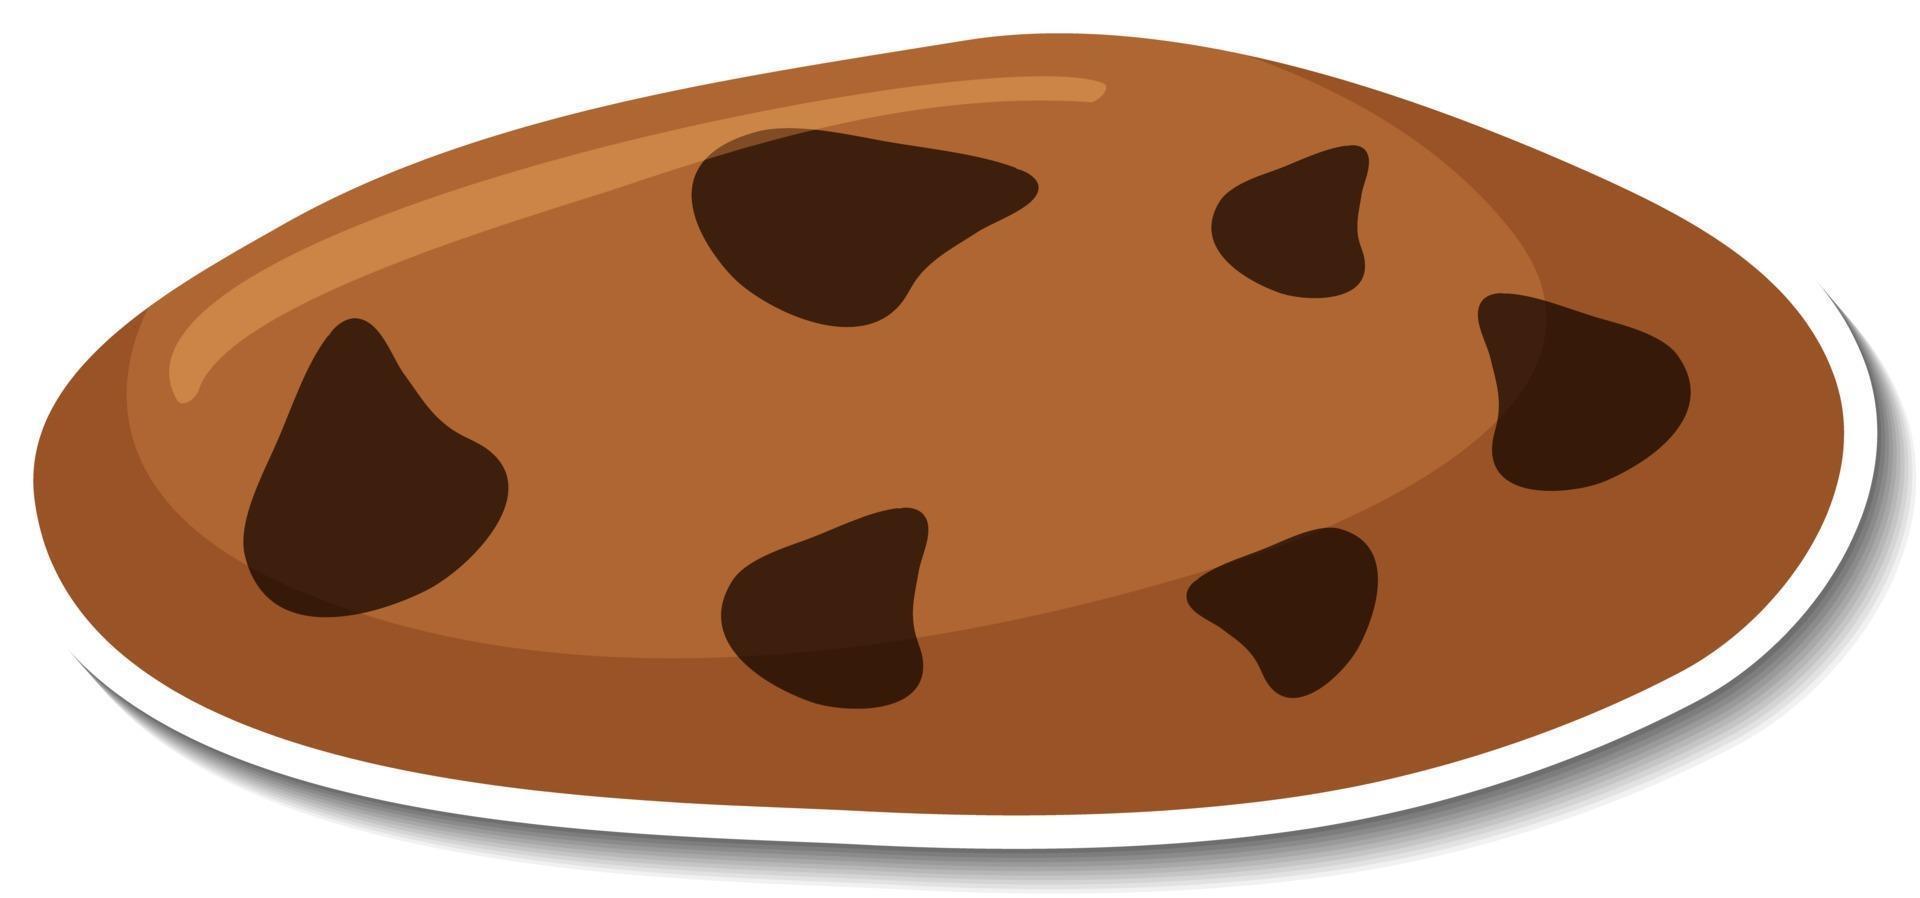 Chocolate chip cookies sticker on white background vector